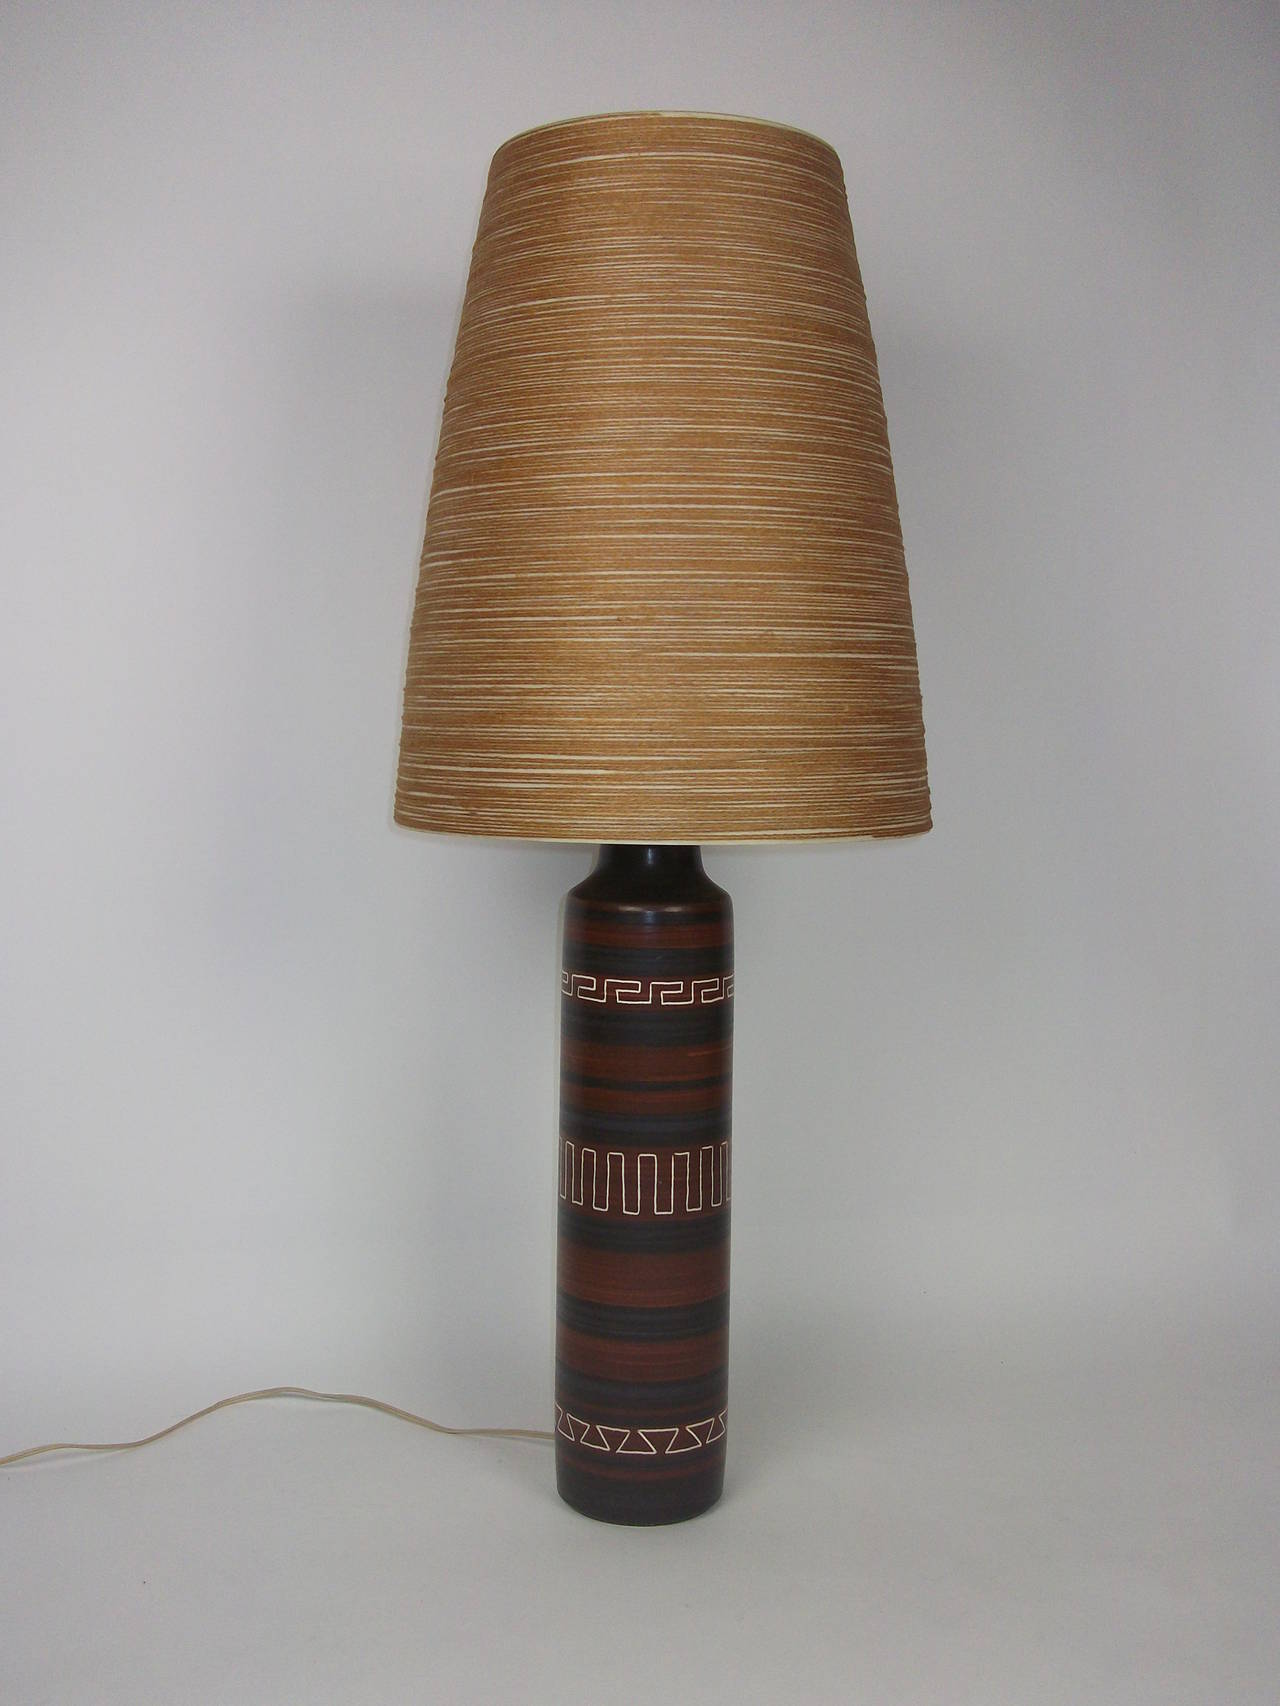 Incredible Hand-Painted Ceramic lamp with it's original fiberglass lamp shade designed by Husband and Wife Duo - Lotte & Gunnar Bostlund - signed at the base - made in Canada  - the long cord feeds in the base, it allows for you to pull out just